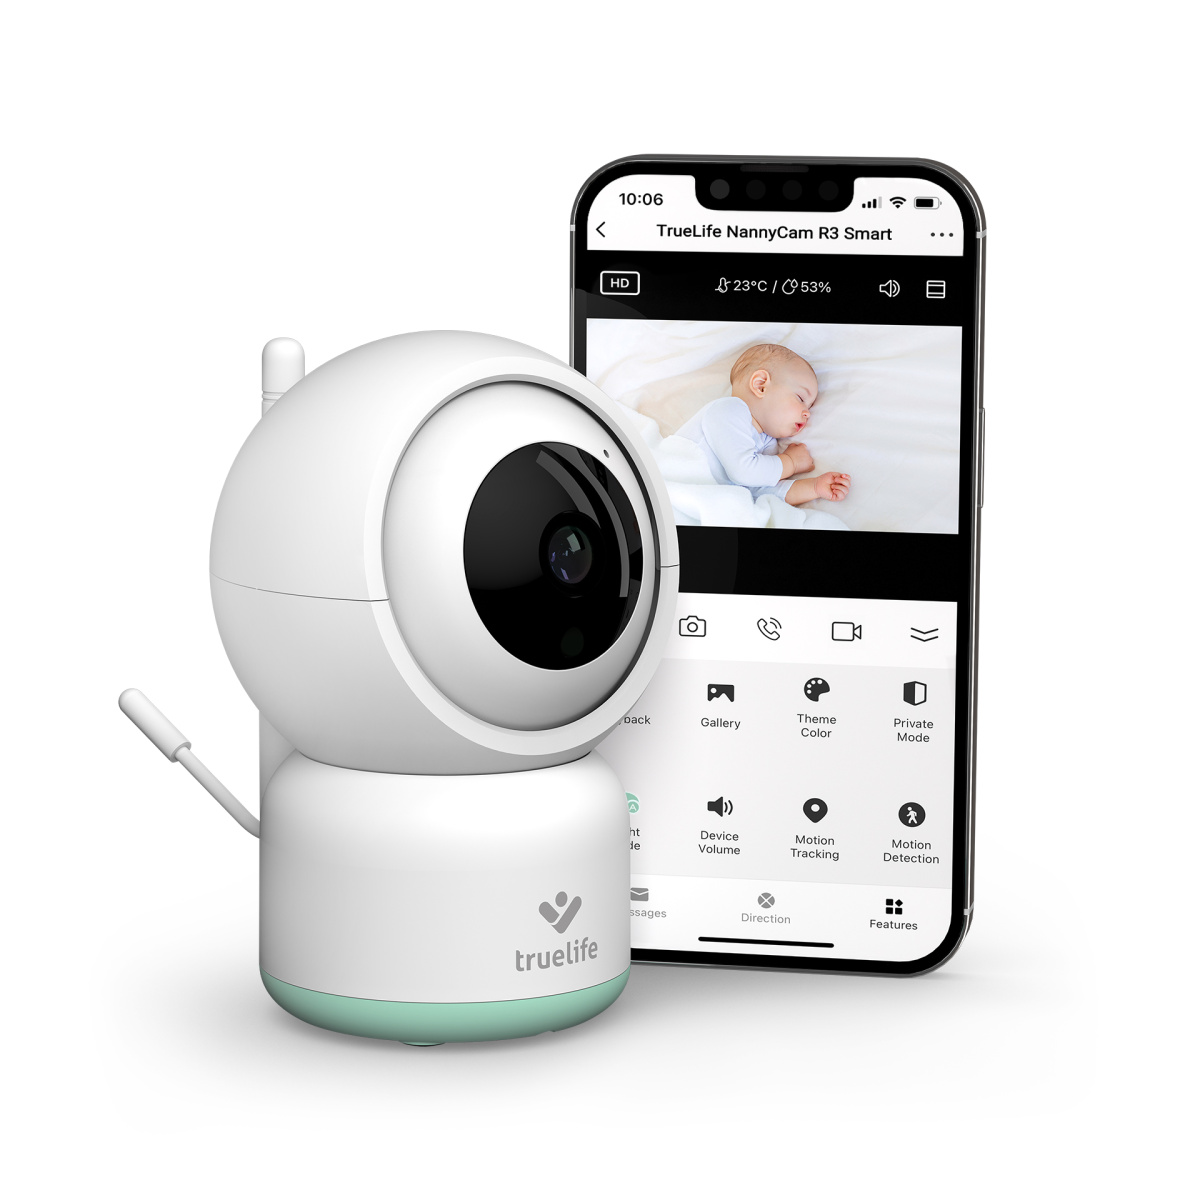 TrueLife NannyCam R3 Smart – smart baby monitor with unlimited range